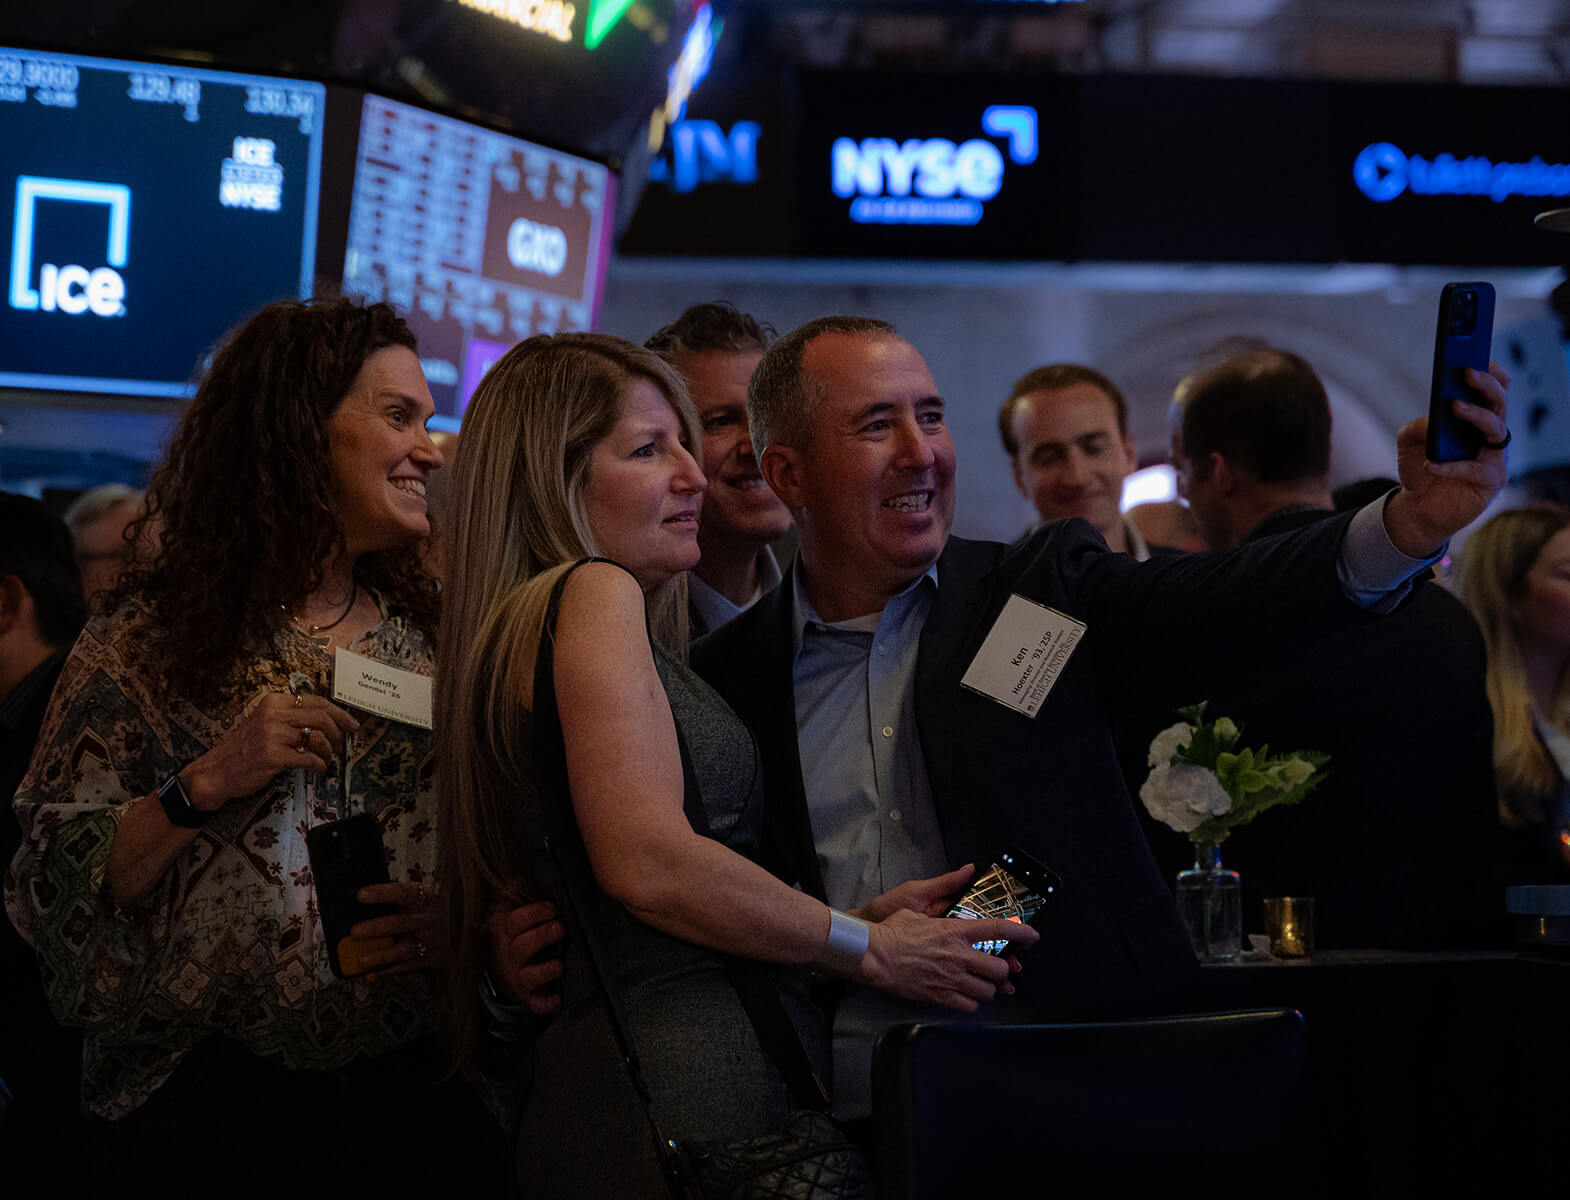 Ken Hoexter poses for a selfie with fellow alumni at the New York Stock Exchange,, with his arm outstretched holding his phone.